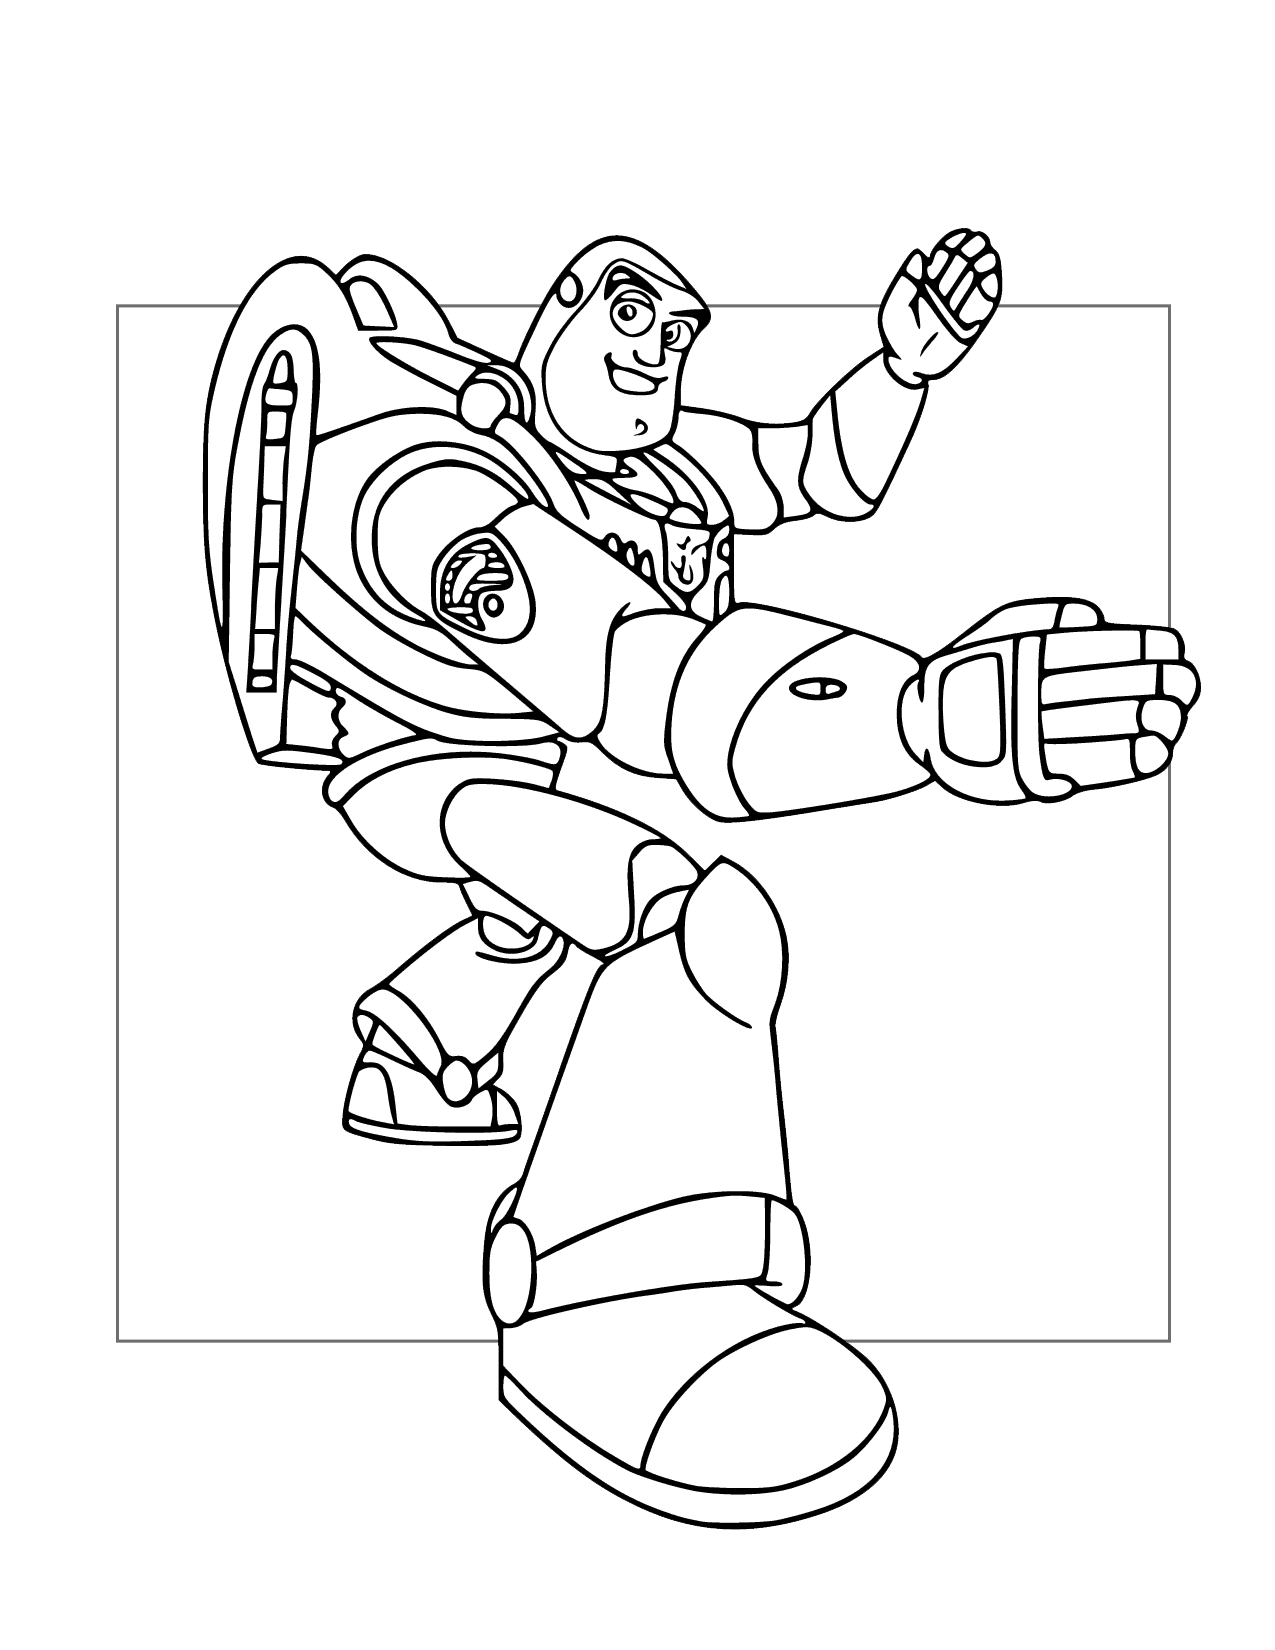 Buzz Lightyear Chopping Action Coloring Page